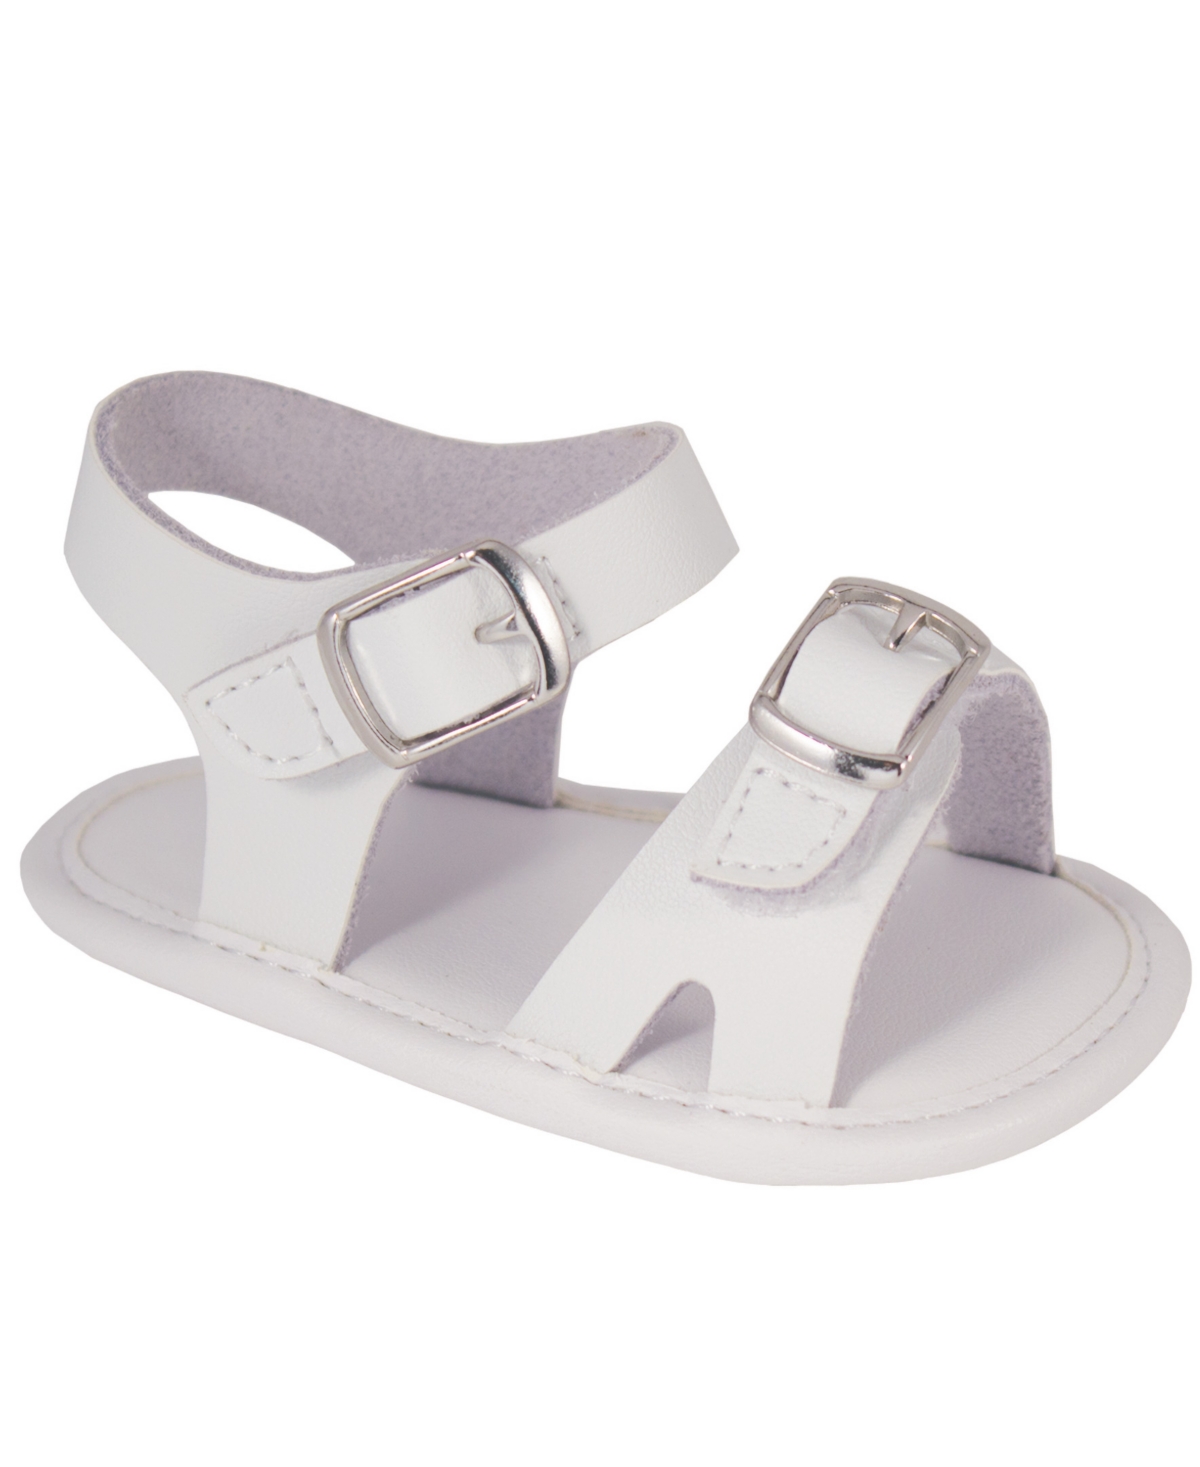 Shop Baby Deer Baby Boys Or Baby Girls Strap Sandal With Buckles In White